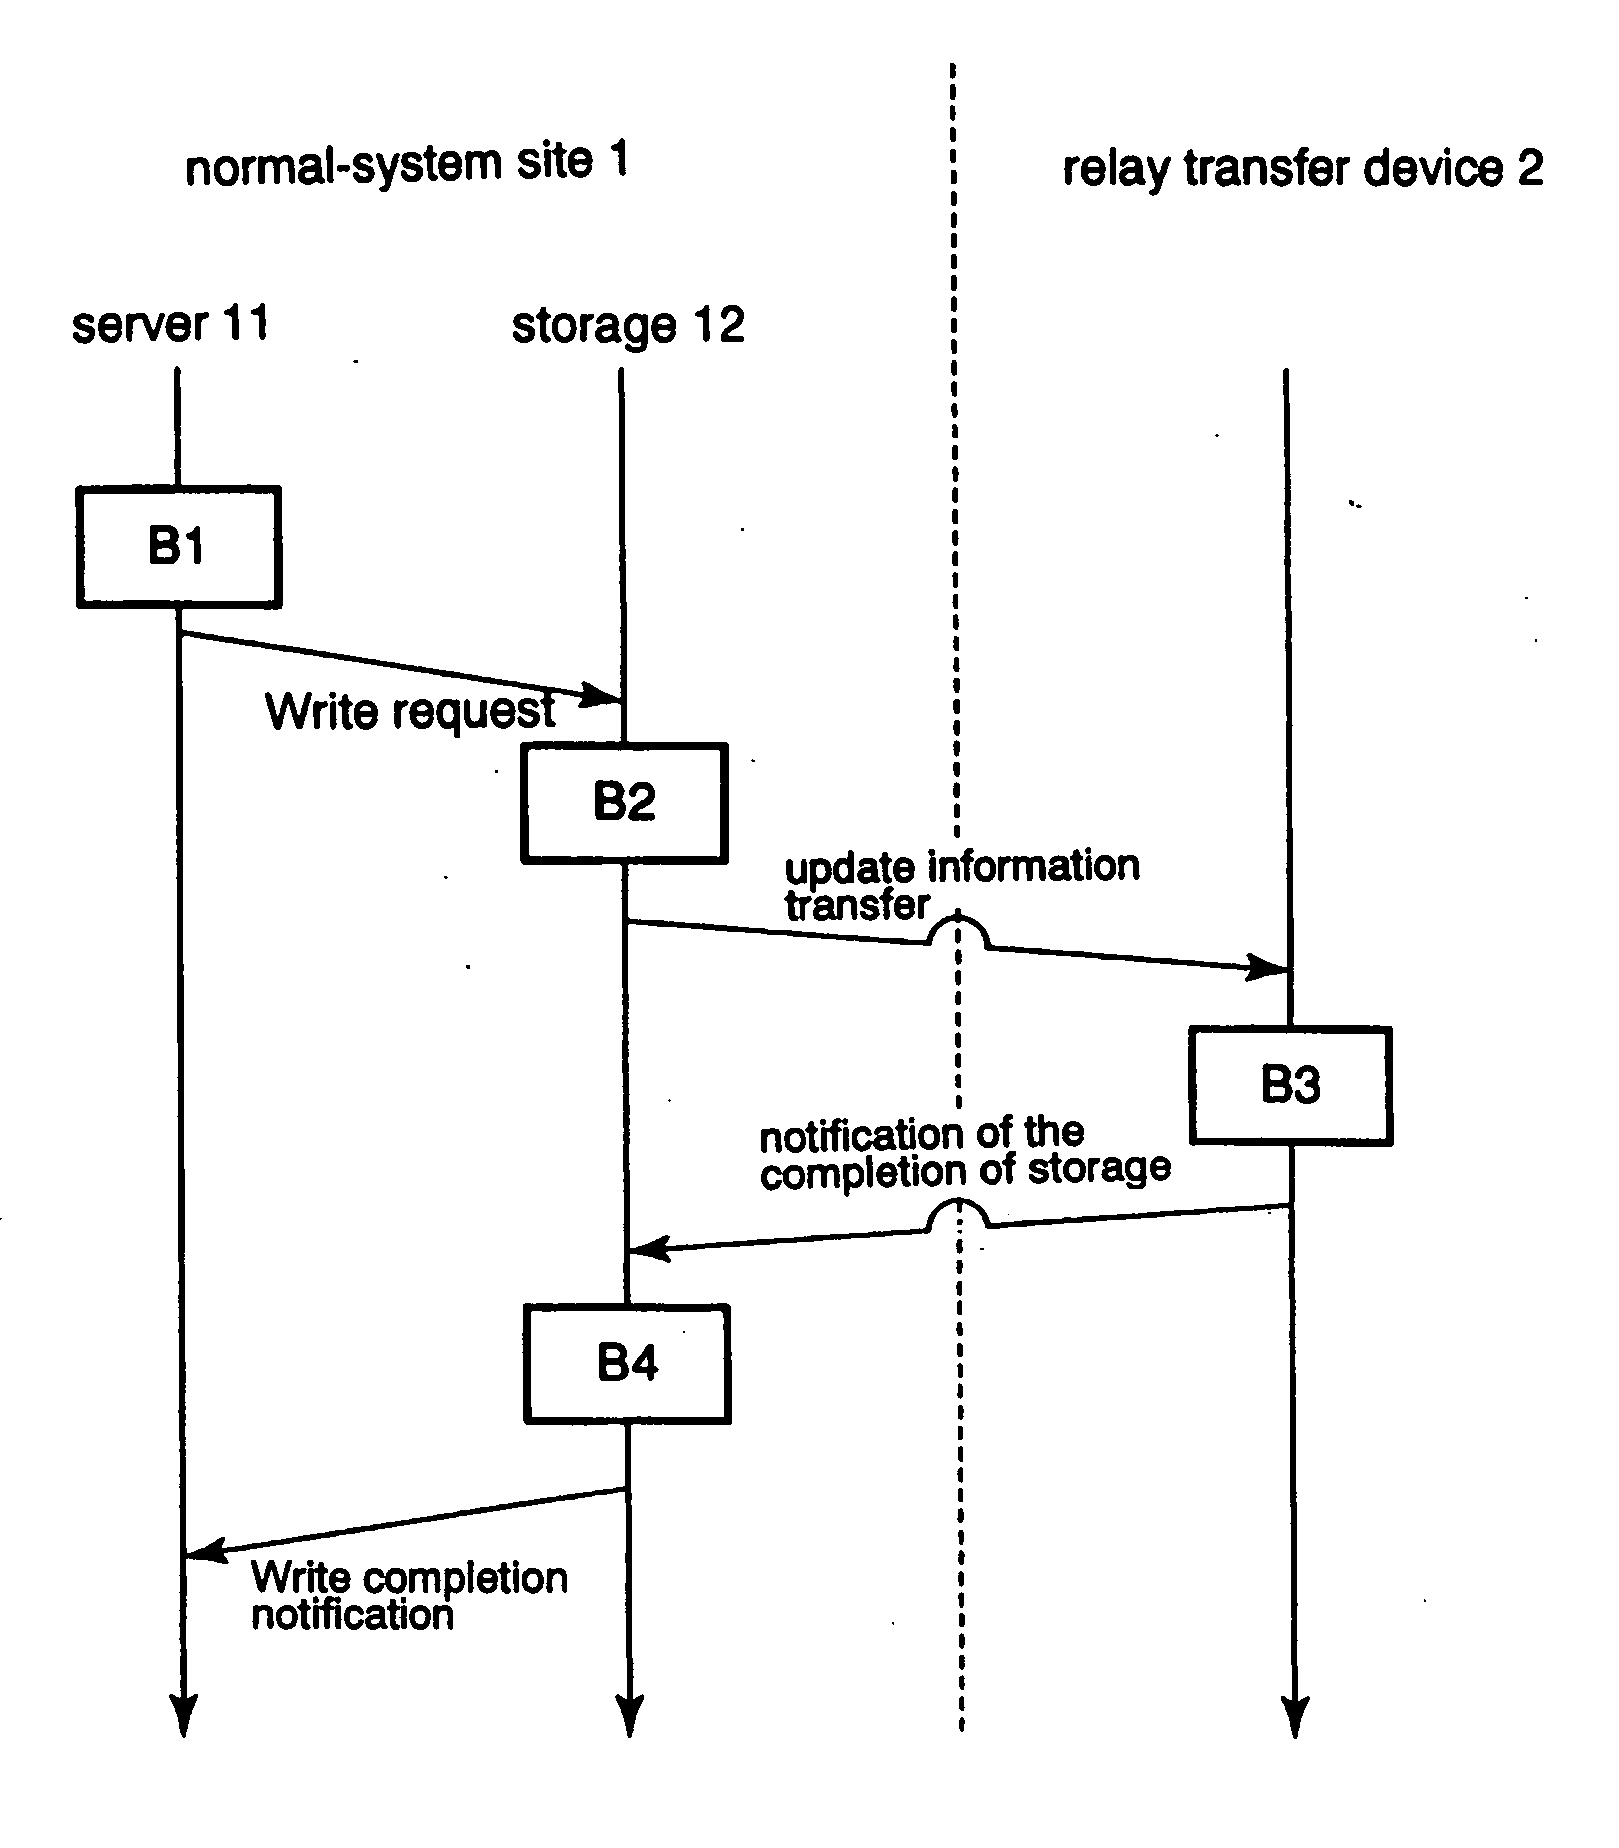 Replication system having the capability to accept commands at a standby-system site before completion of updating thereof